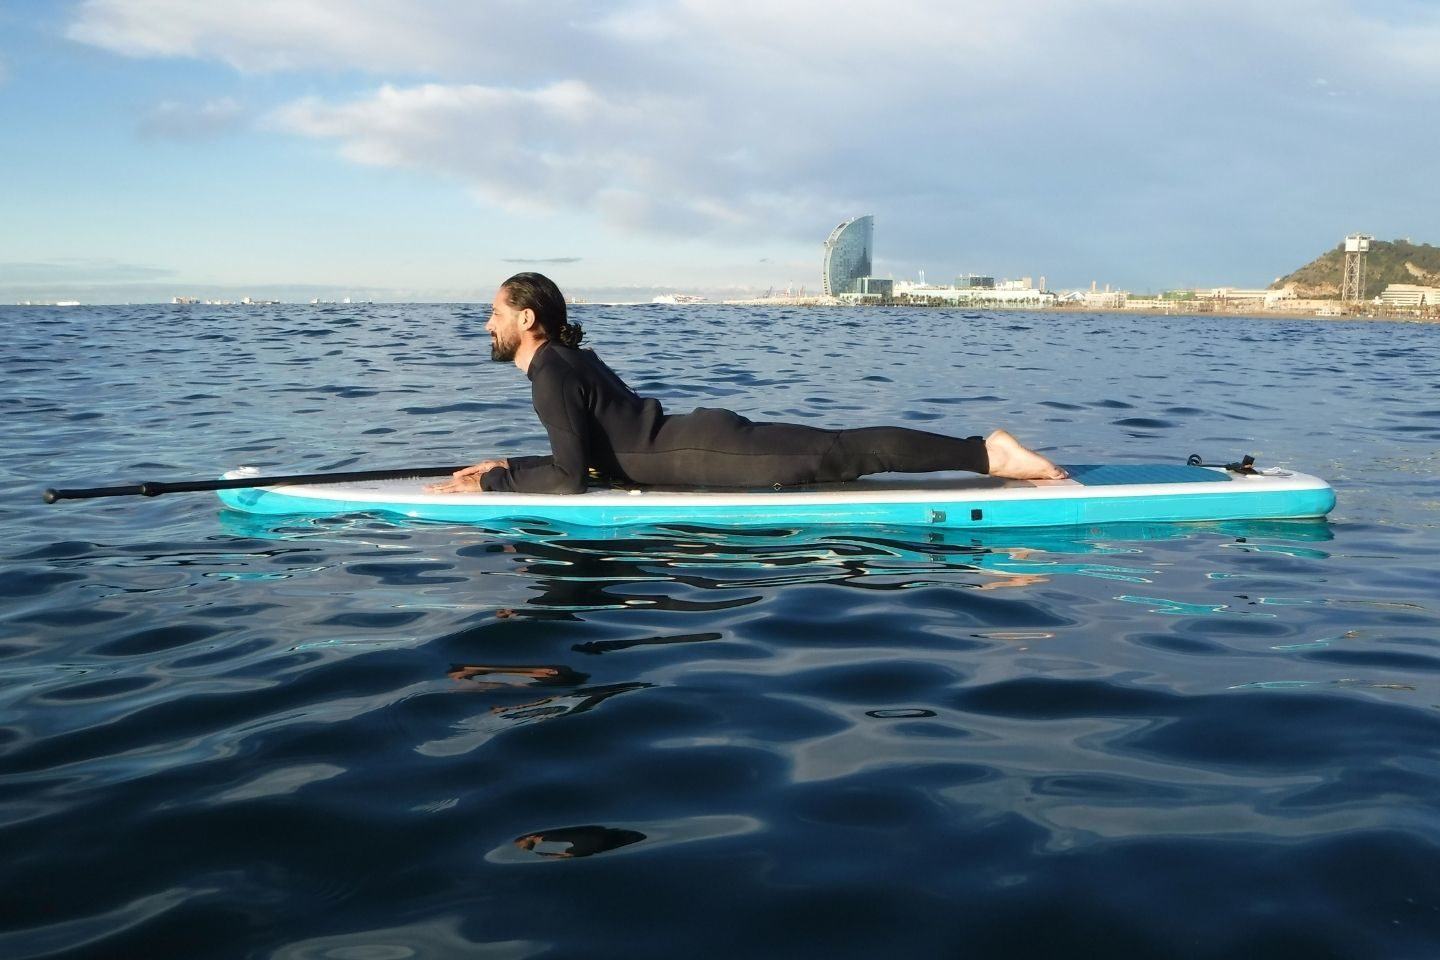 A man in a wetsuit on a blue paddle board